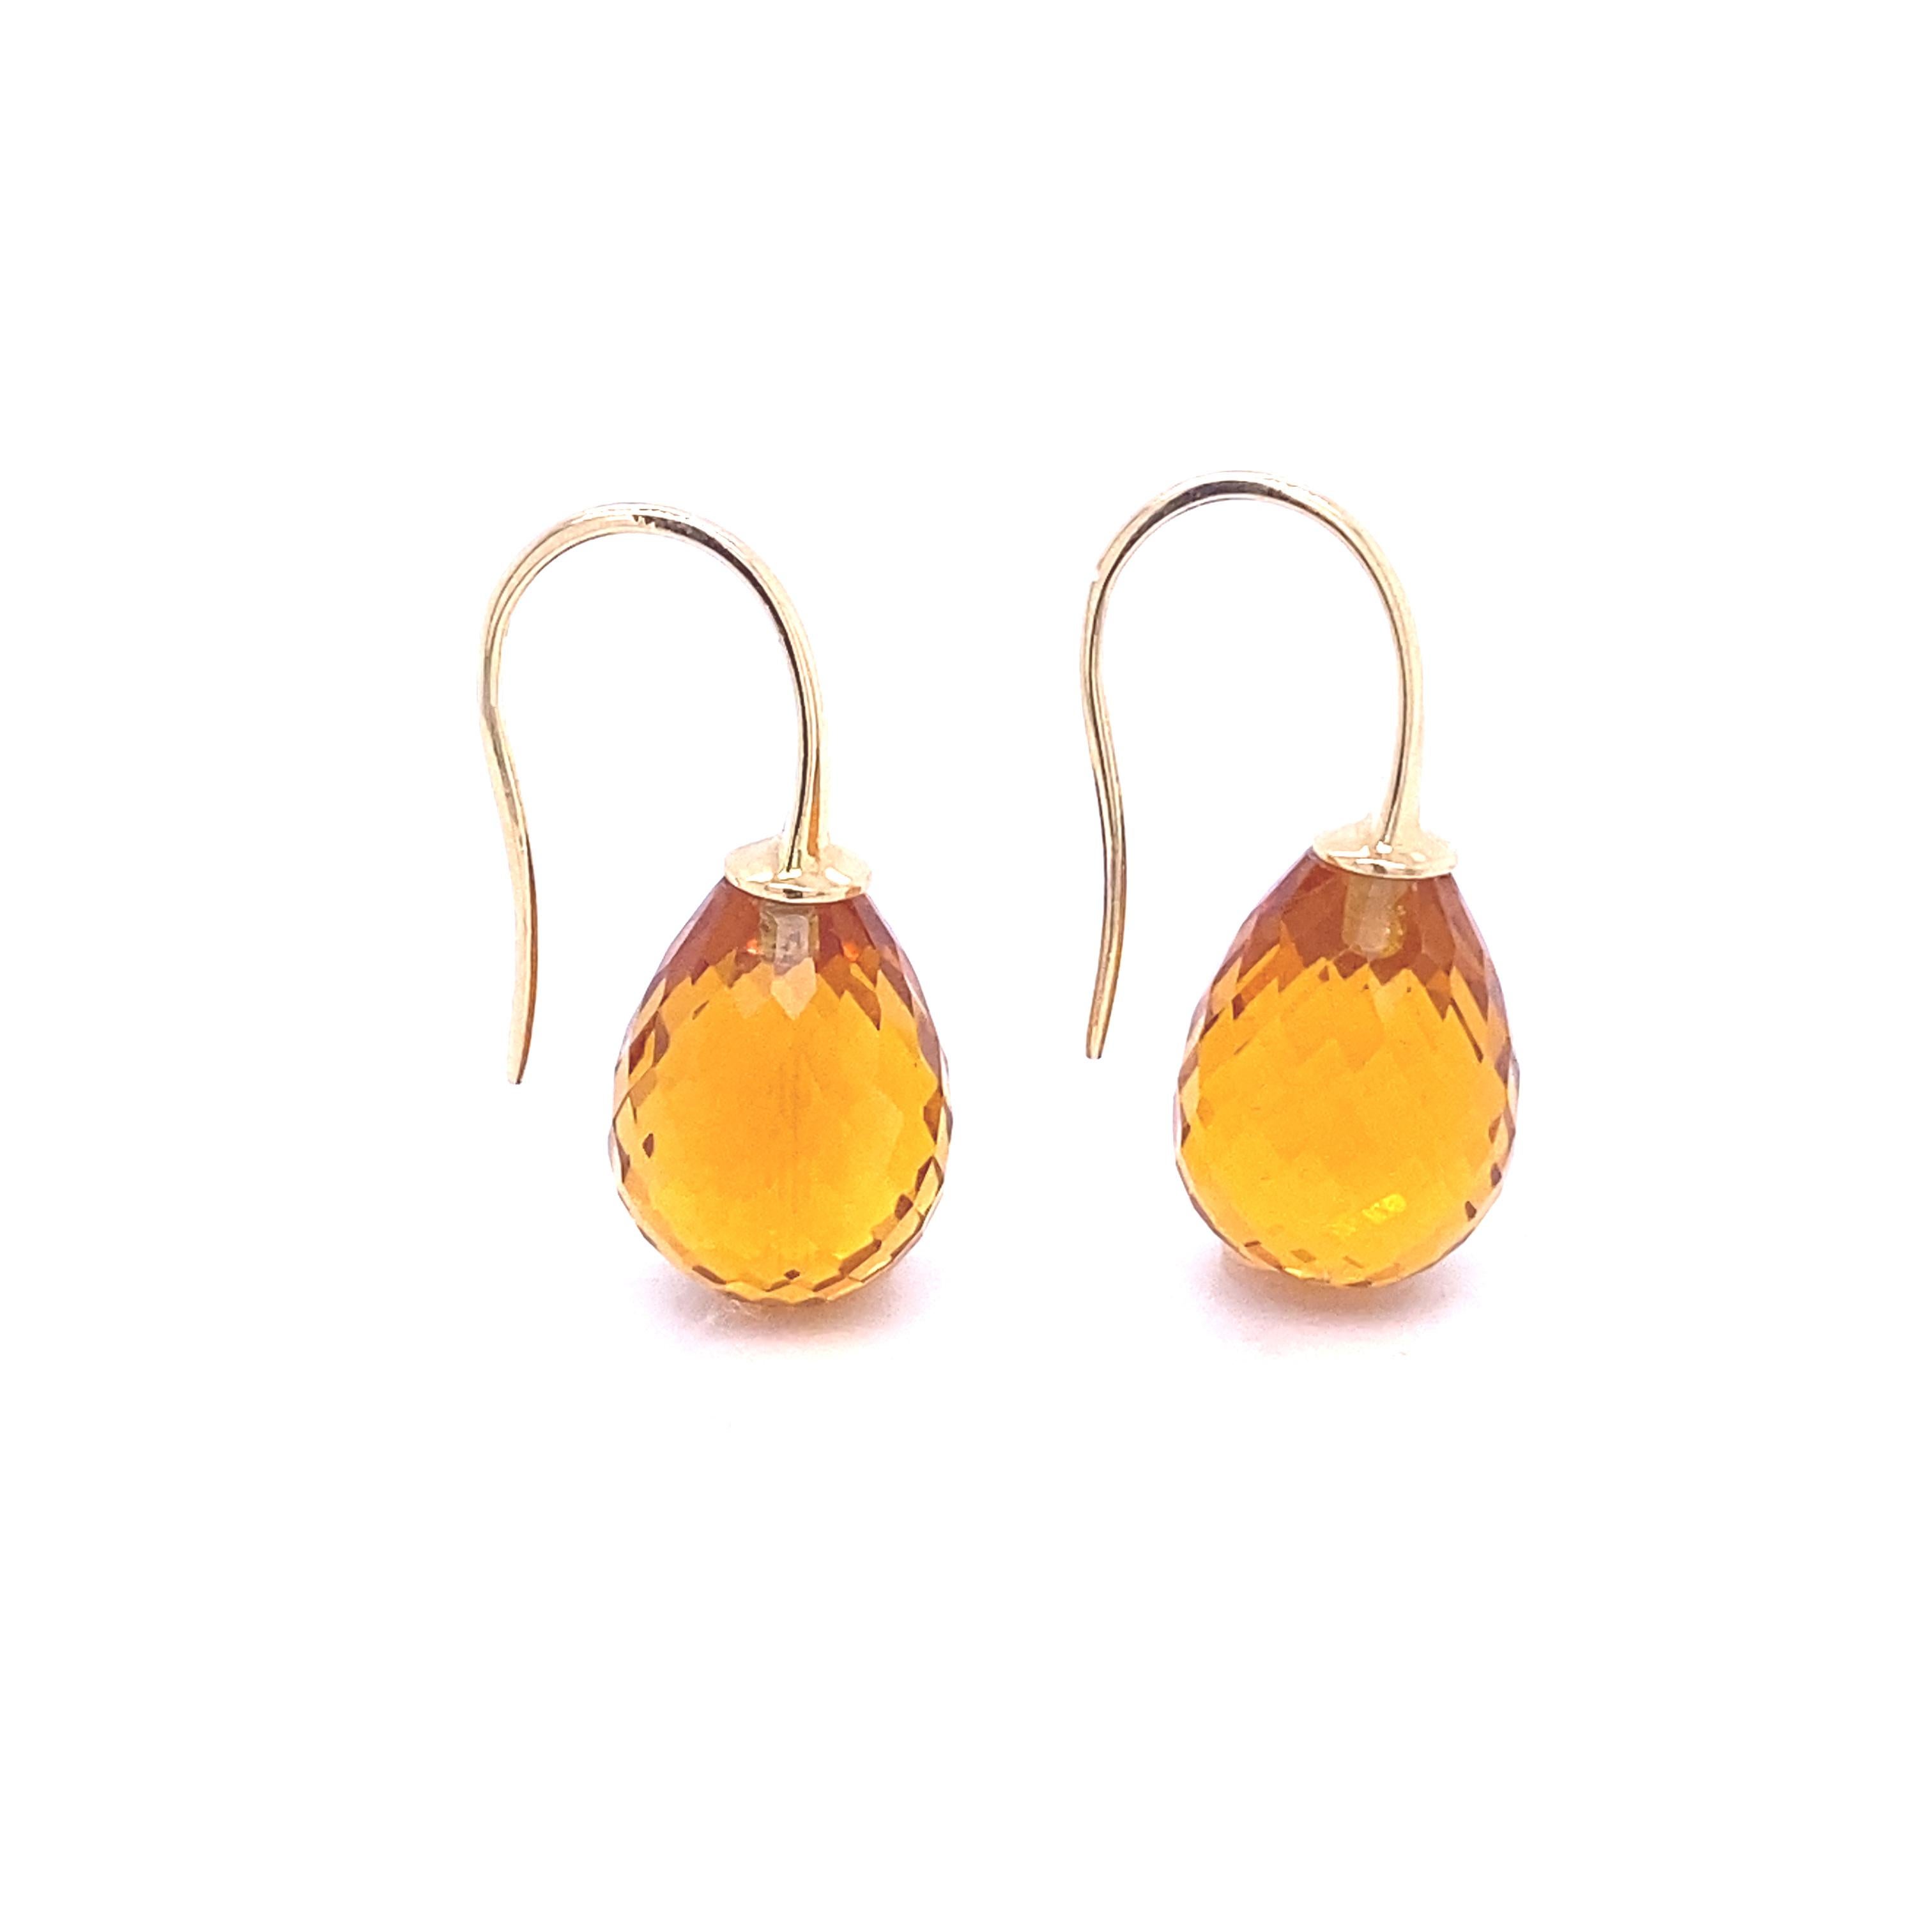 Bead Drop Earrings in Yellow Gold with a Hydro Citrine For Sale